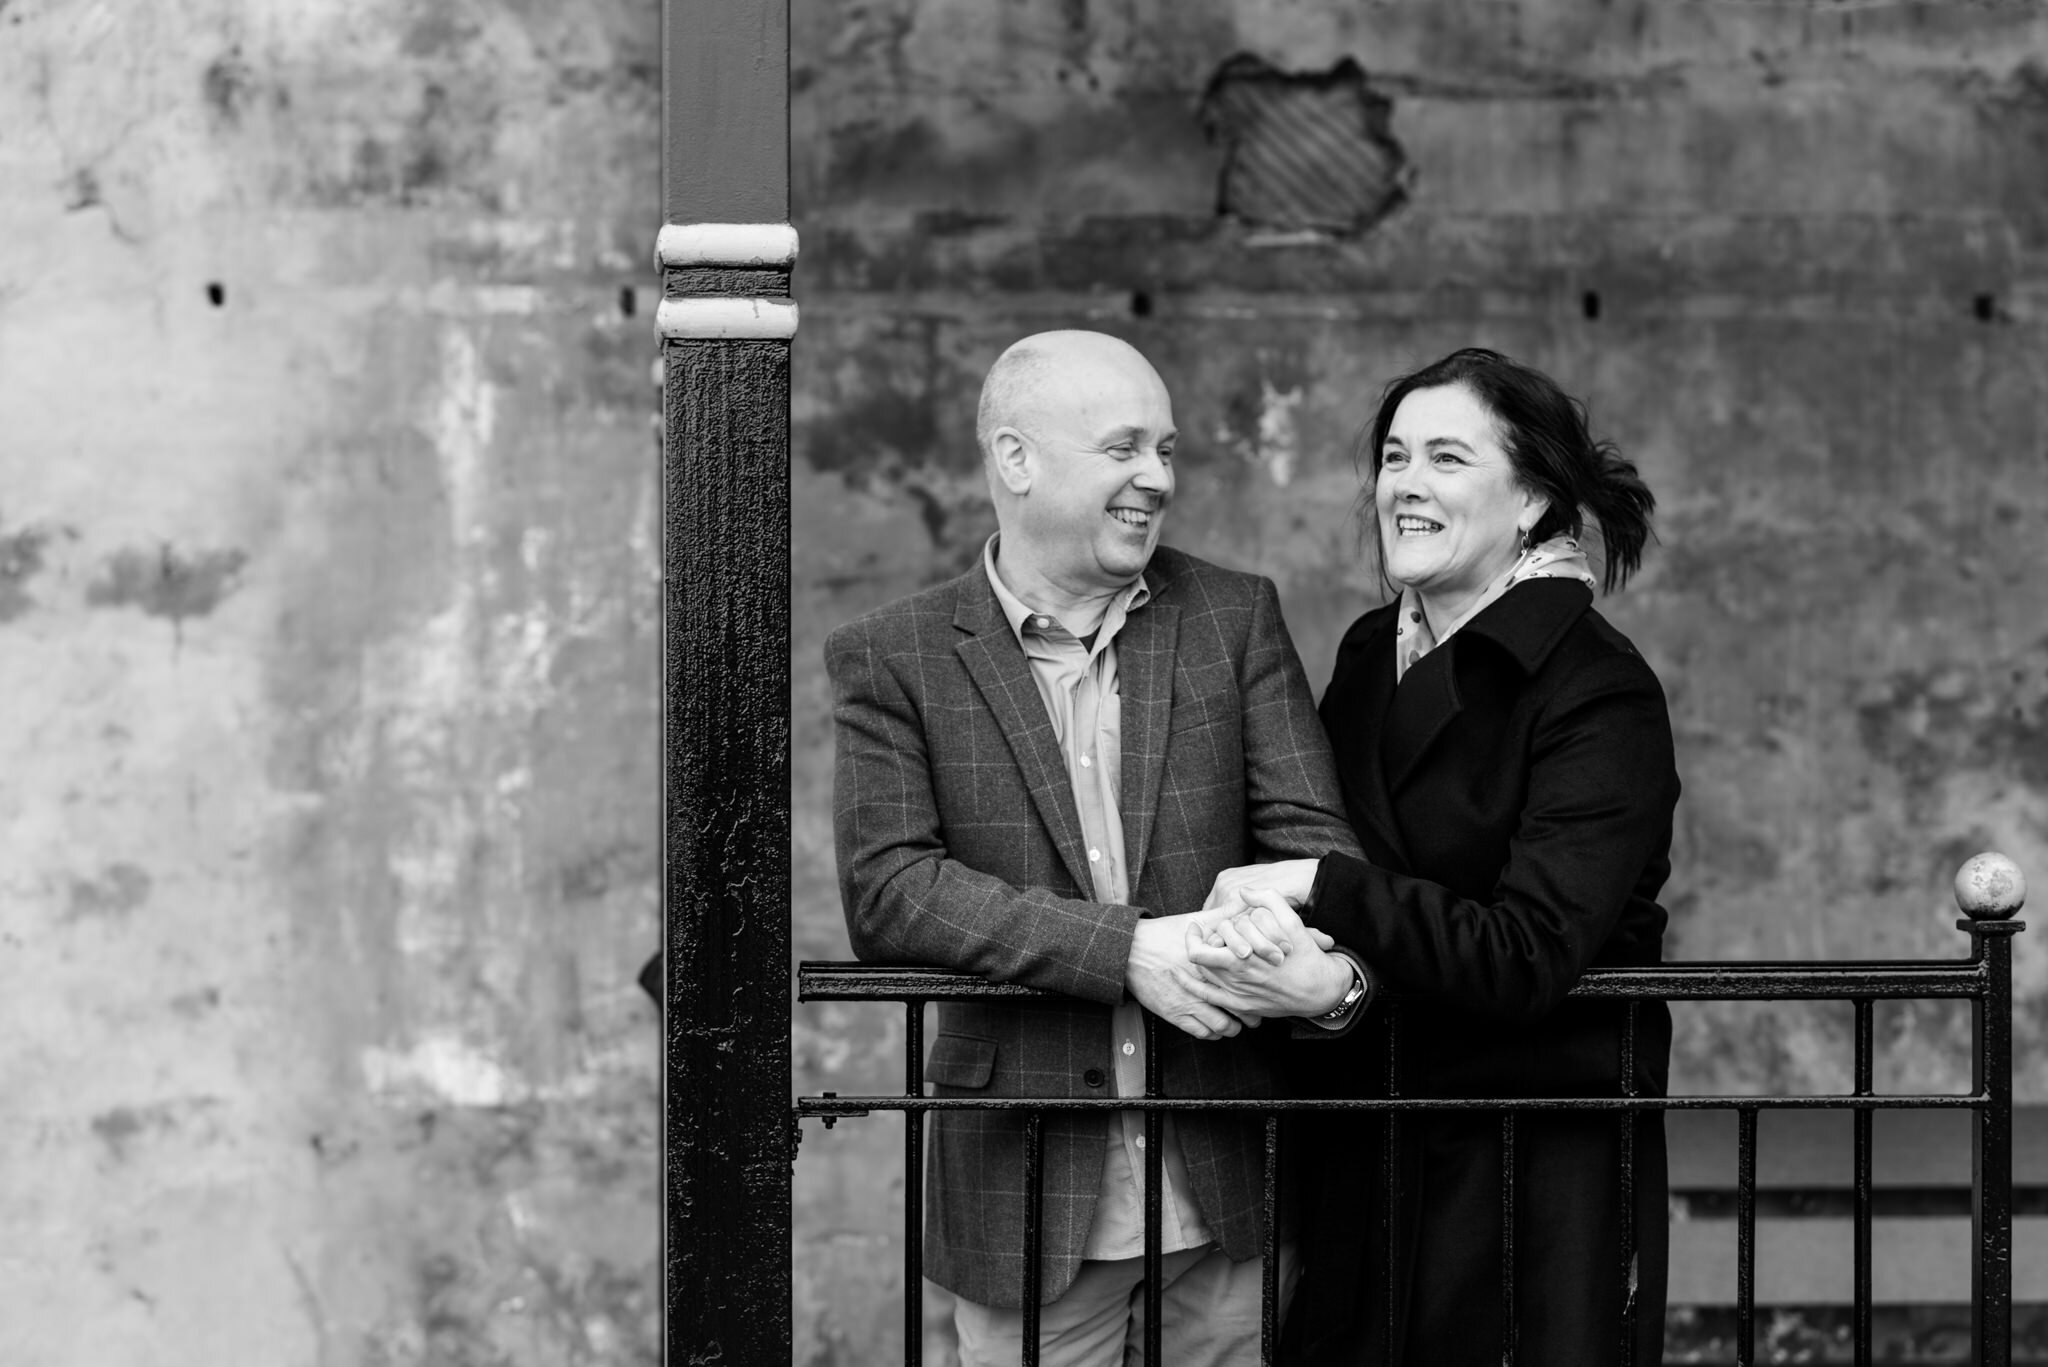  Elaine and Craig practice shoot - March 2020 - © Julie Broadfoot - www.juliebee.co.uk 